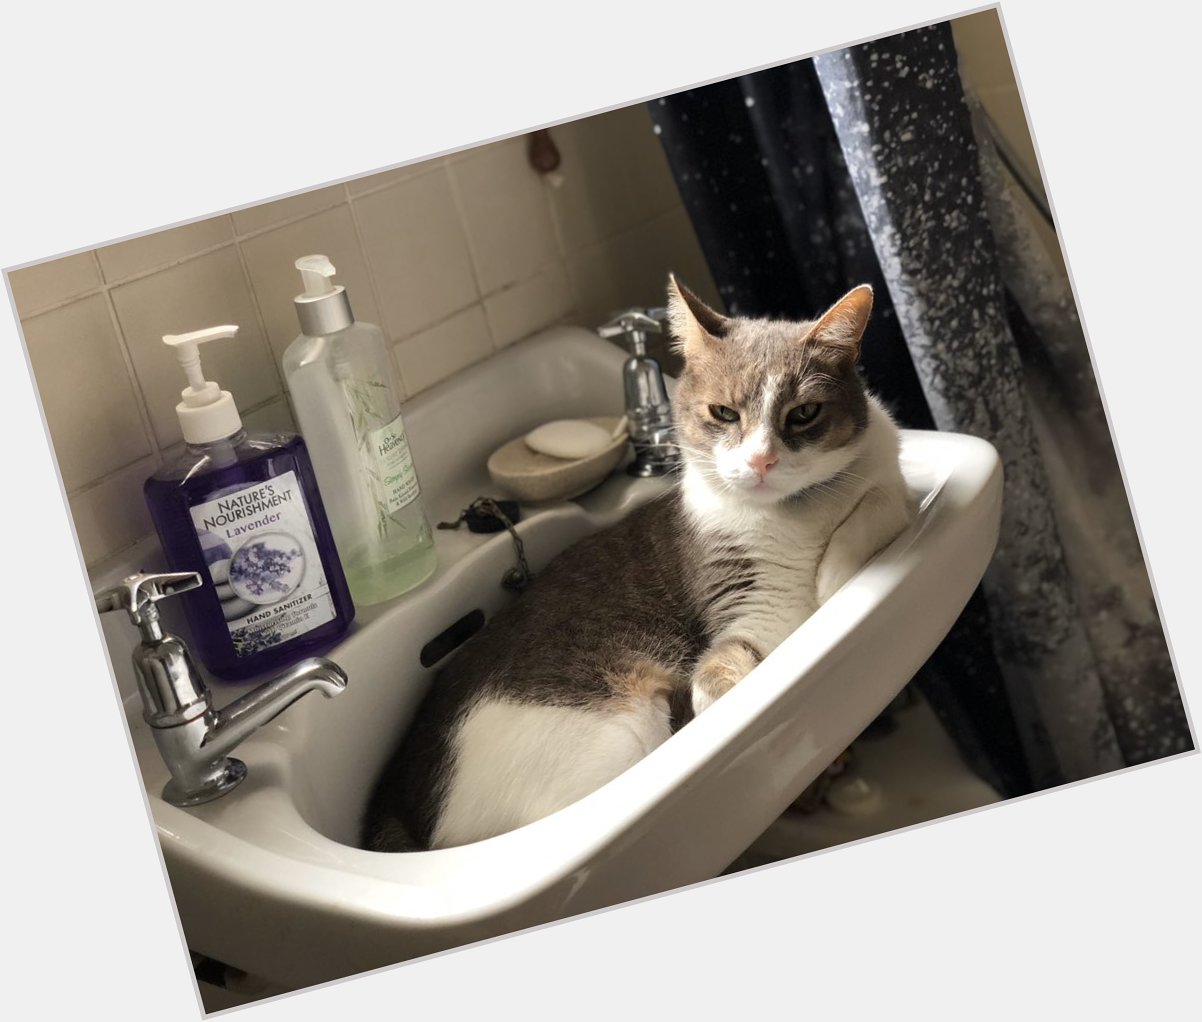  This Sultan of the Sink says happy birthday Soup! 